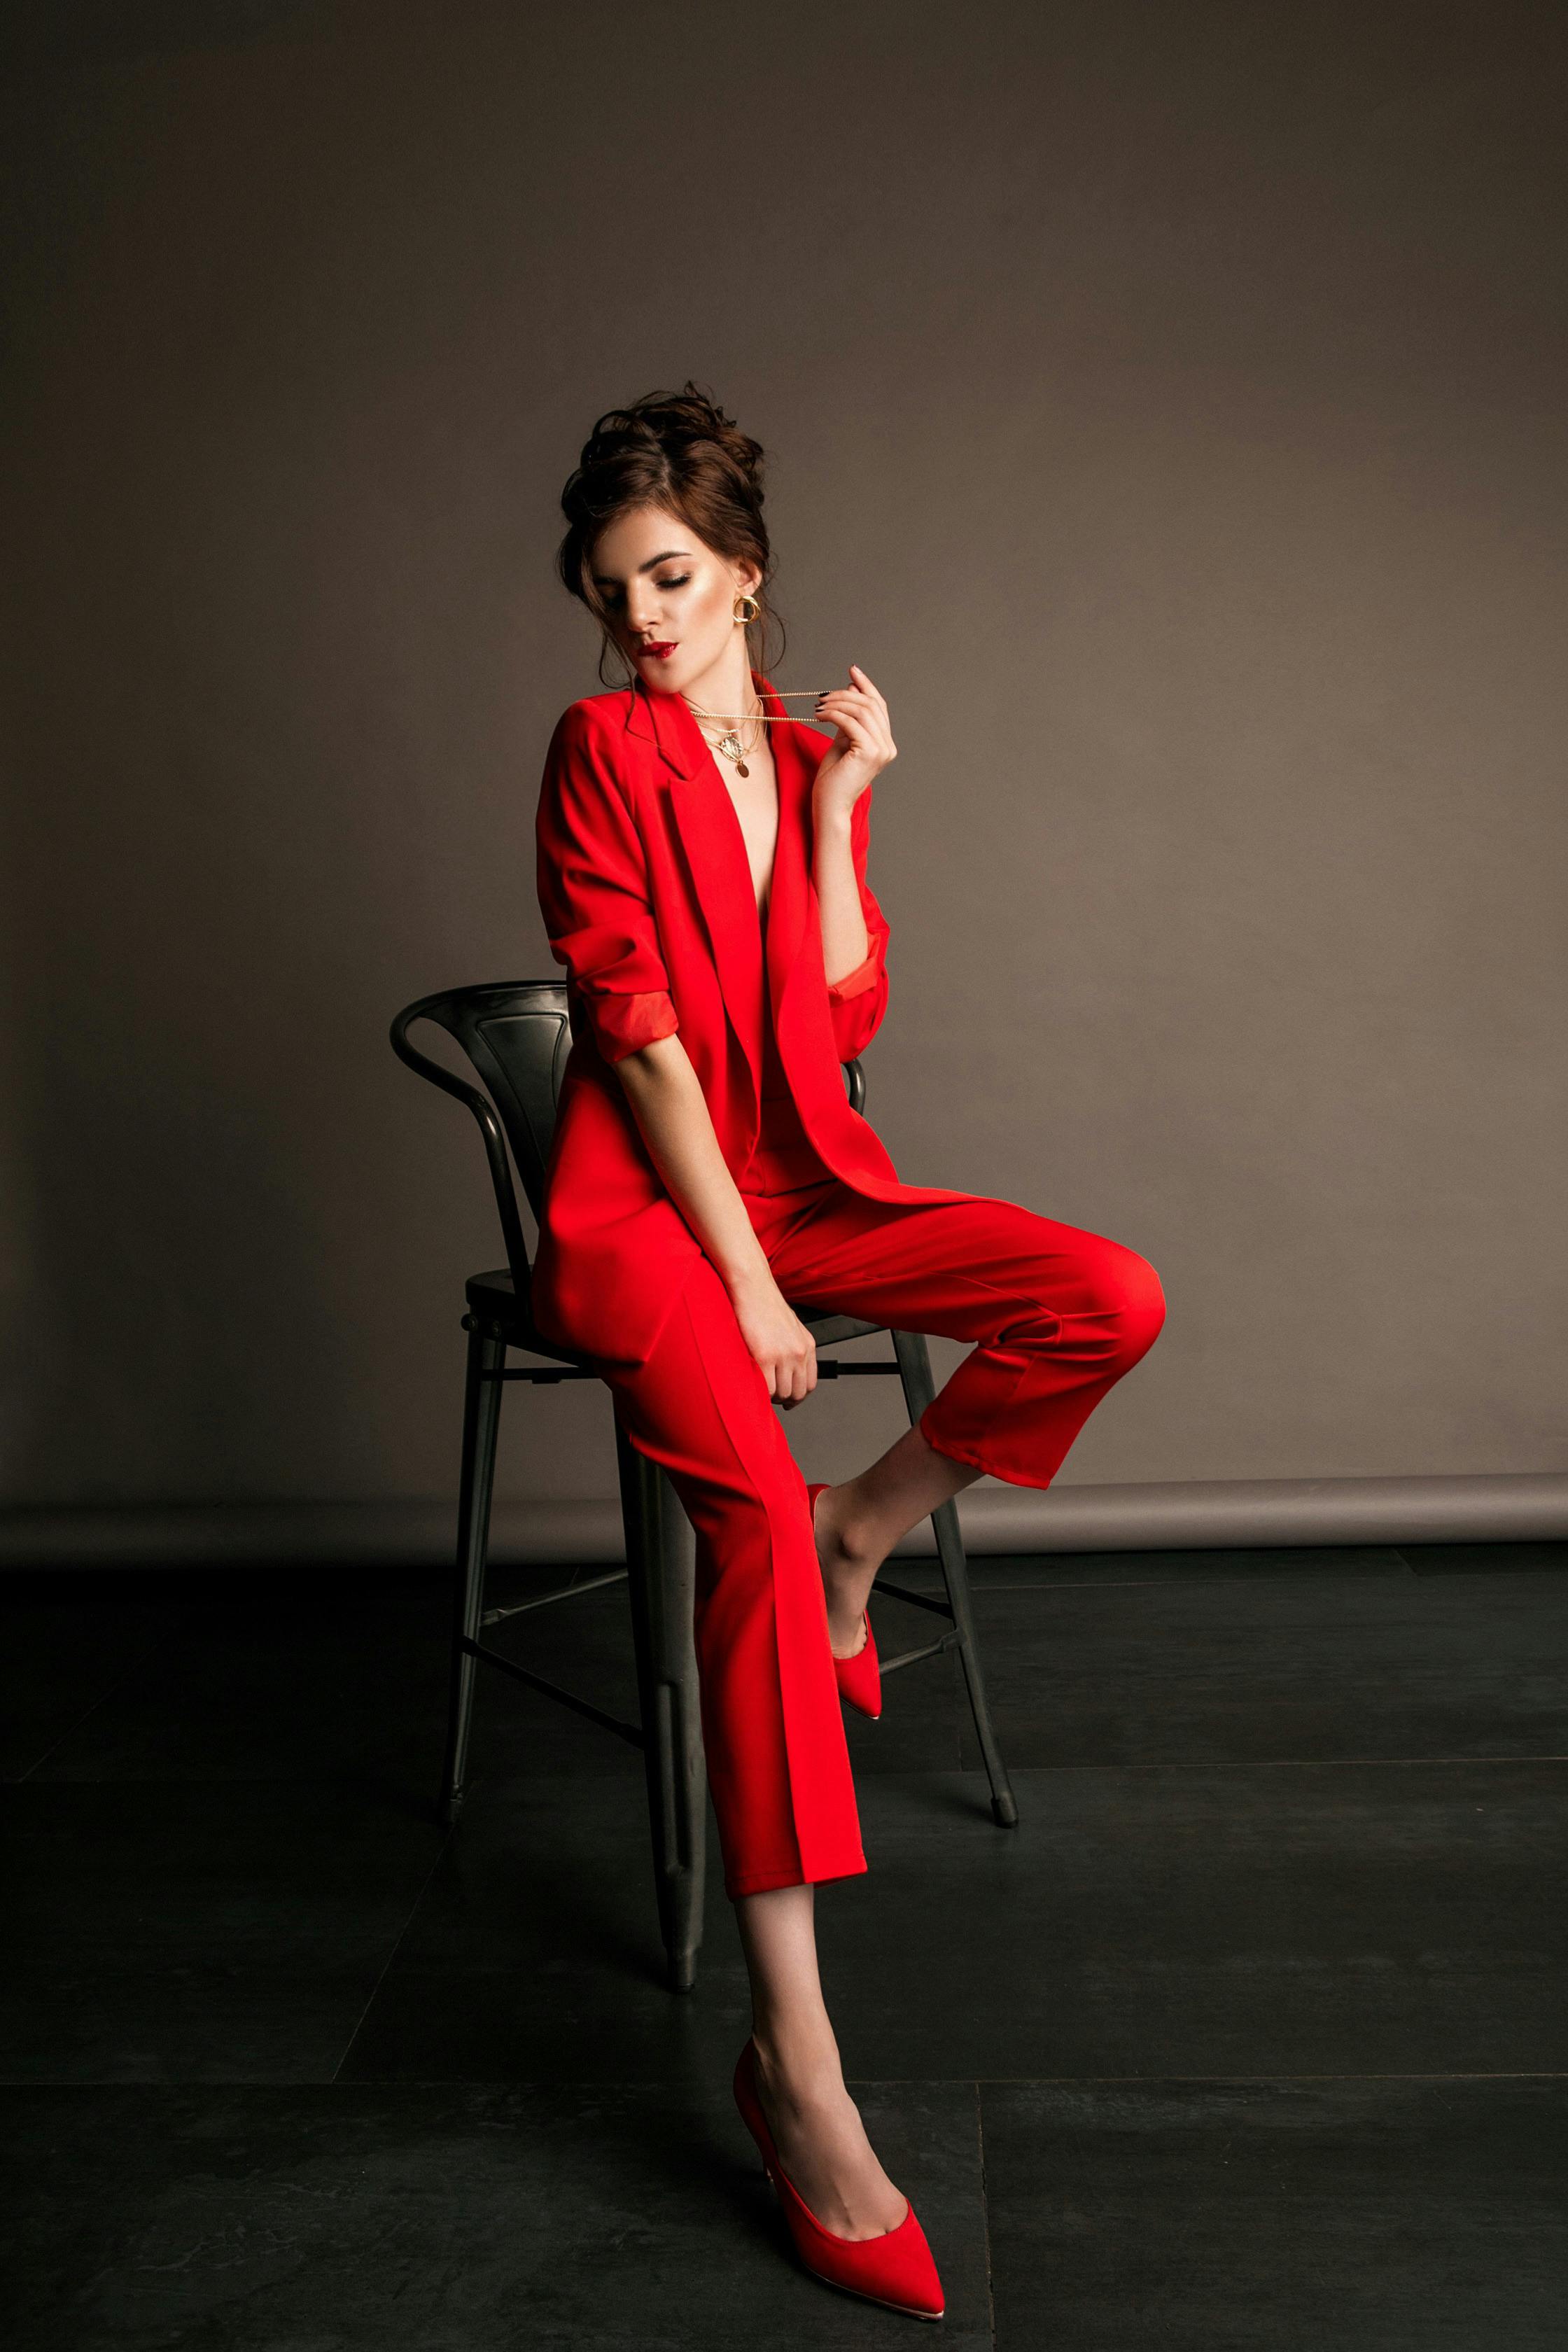 Premium Photo | A woman in a red suit with a black shirt and red pants.